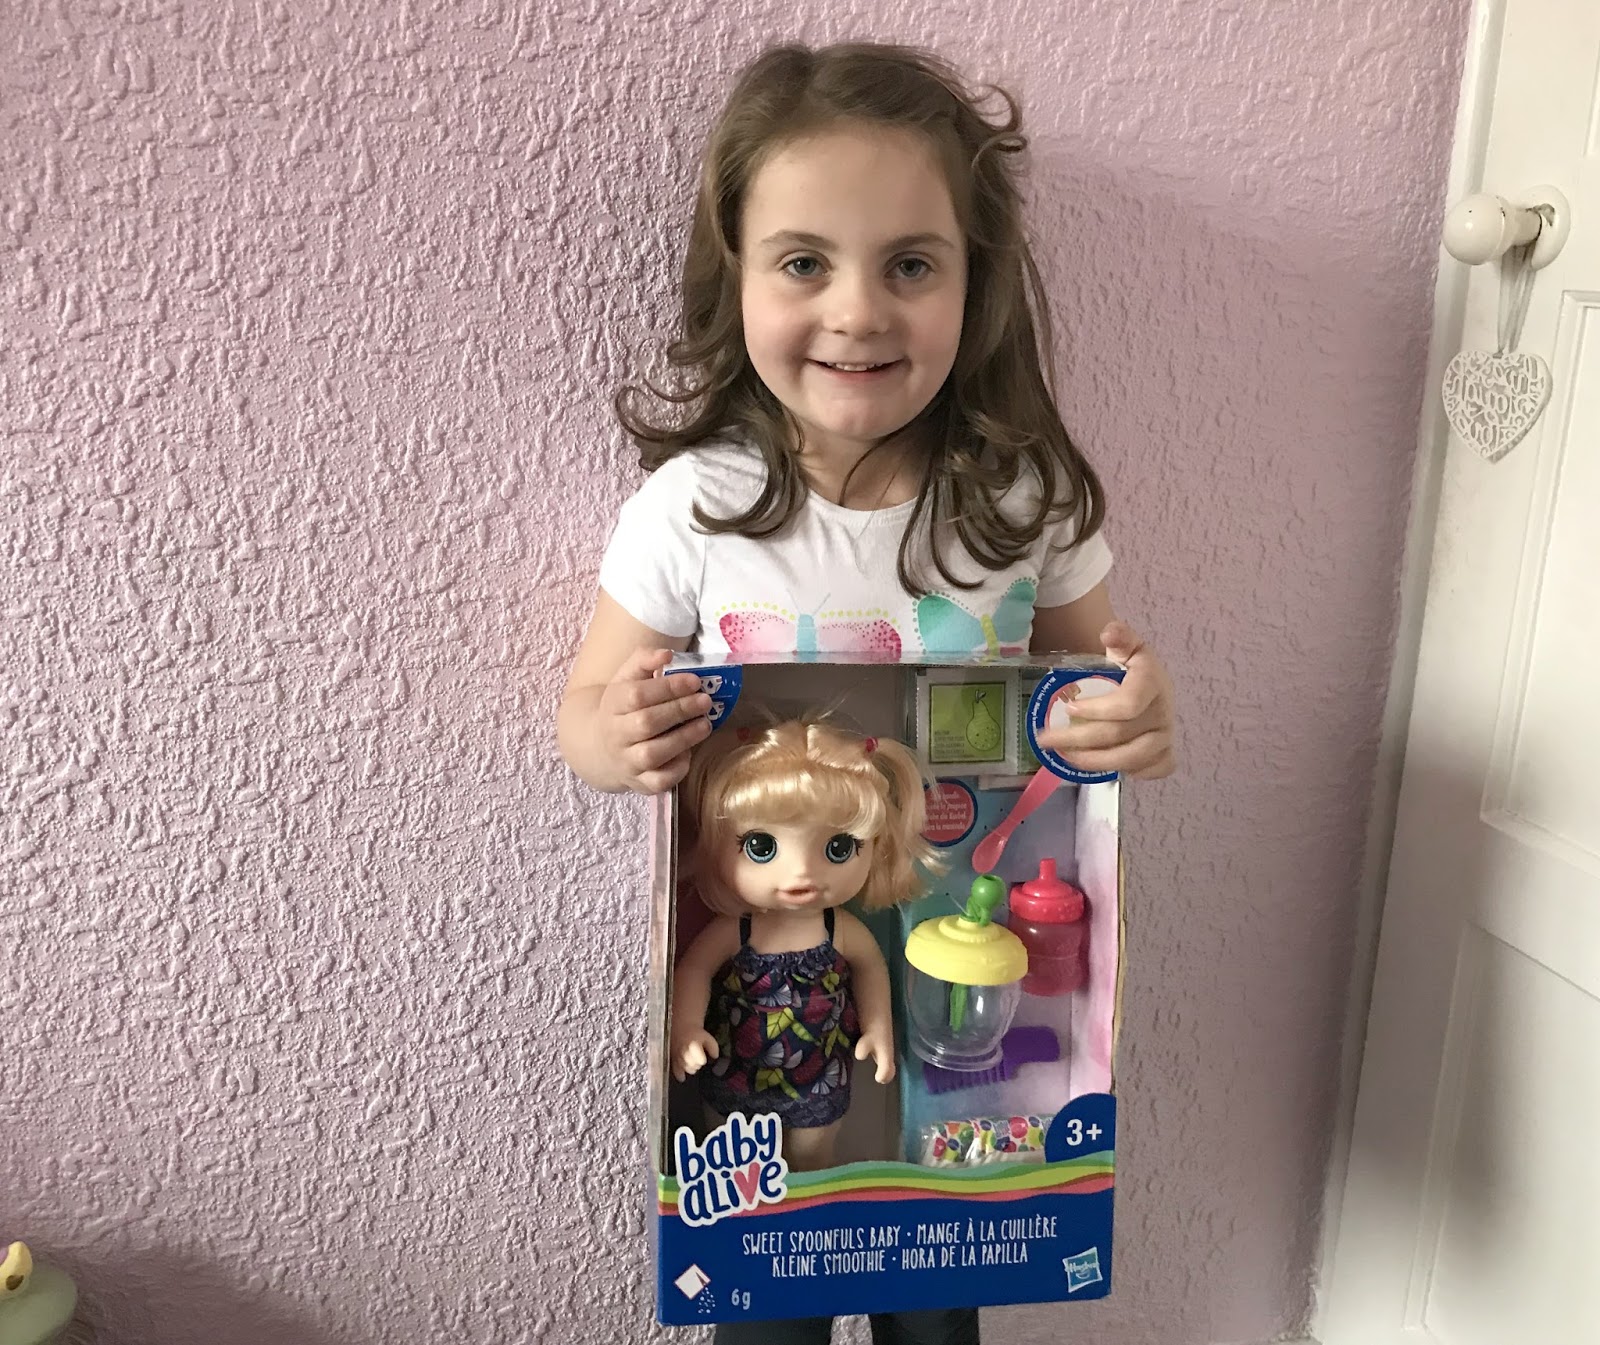 Baby Alive Sweet Spoonfuls Doll Review